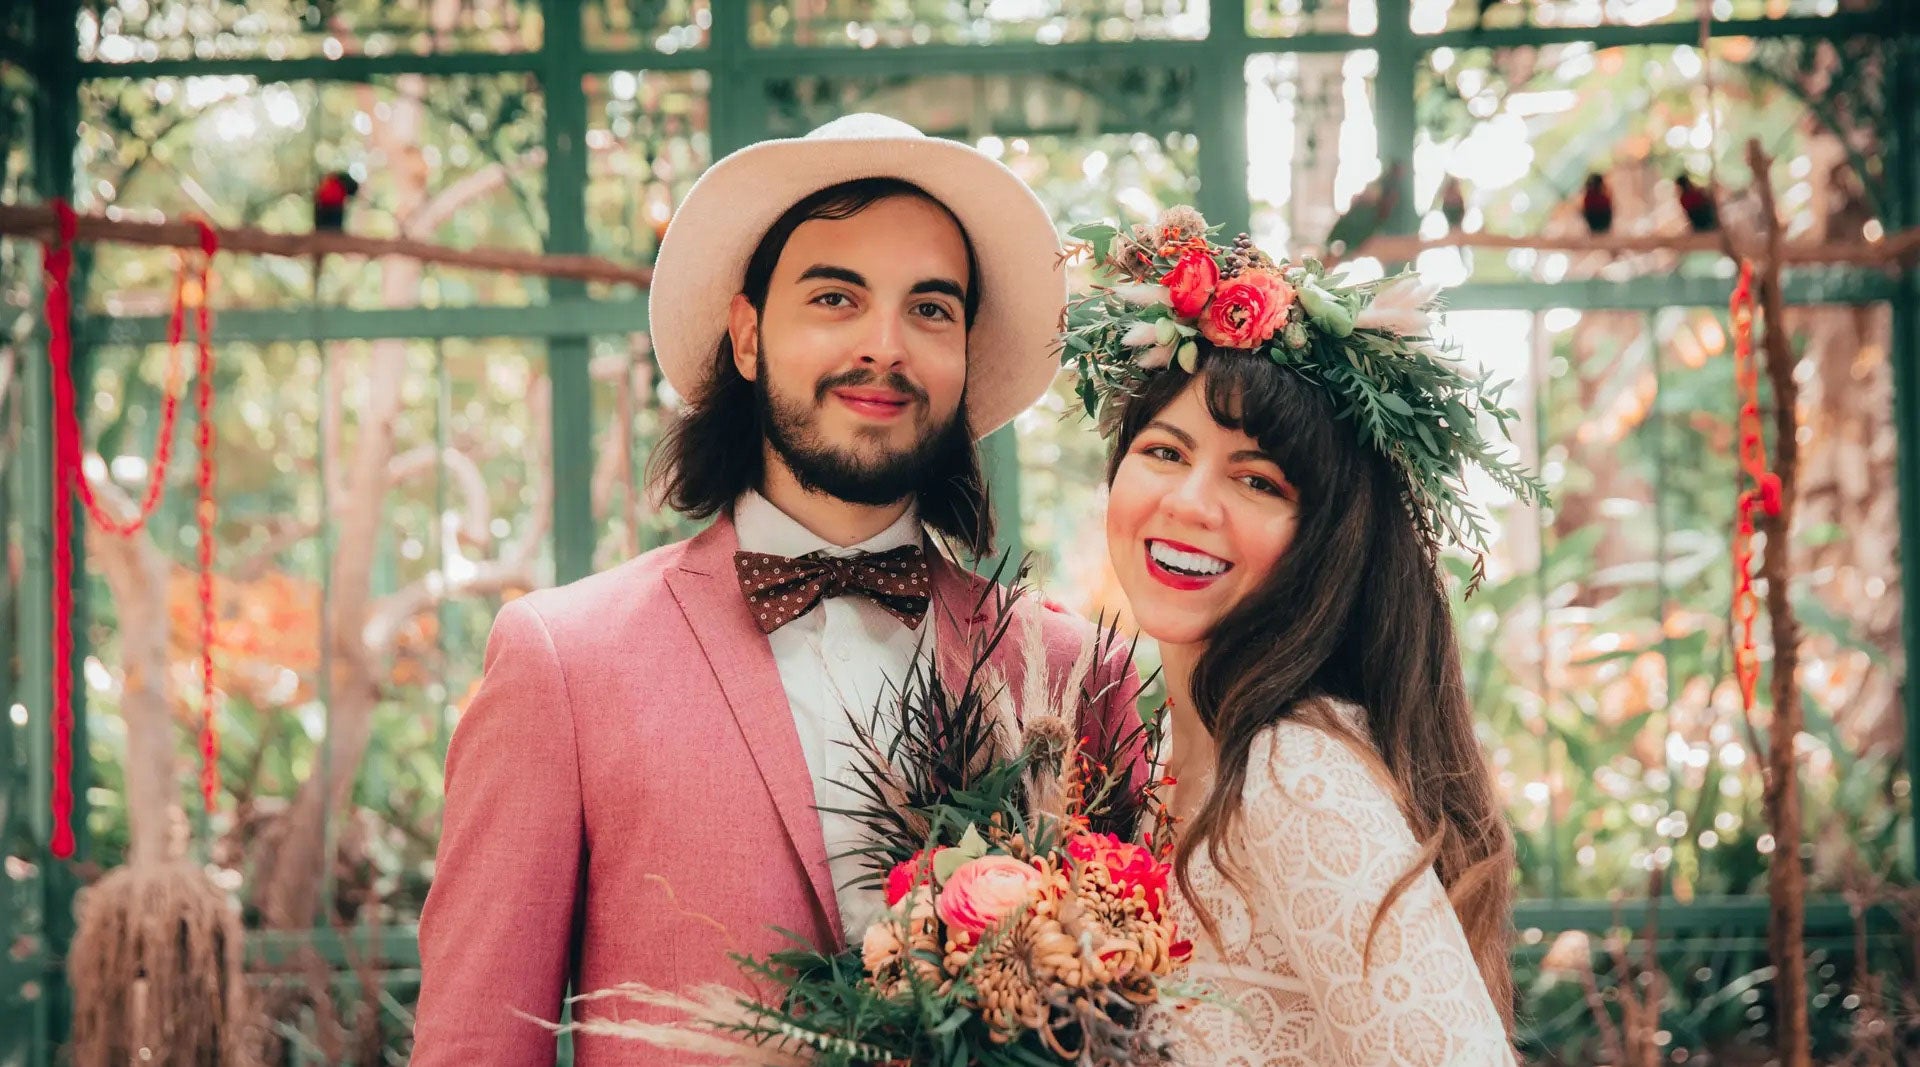 Beautiful weeding photo of a couple with a bohemian floral arrangement